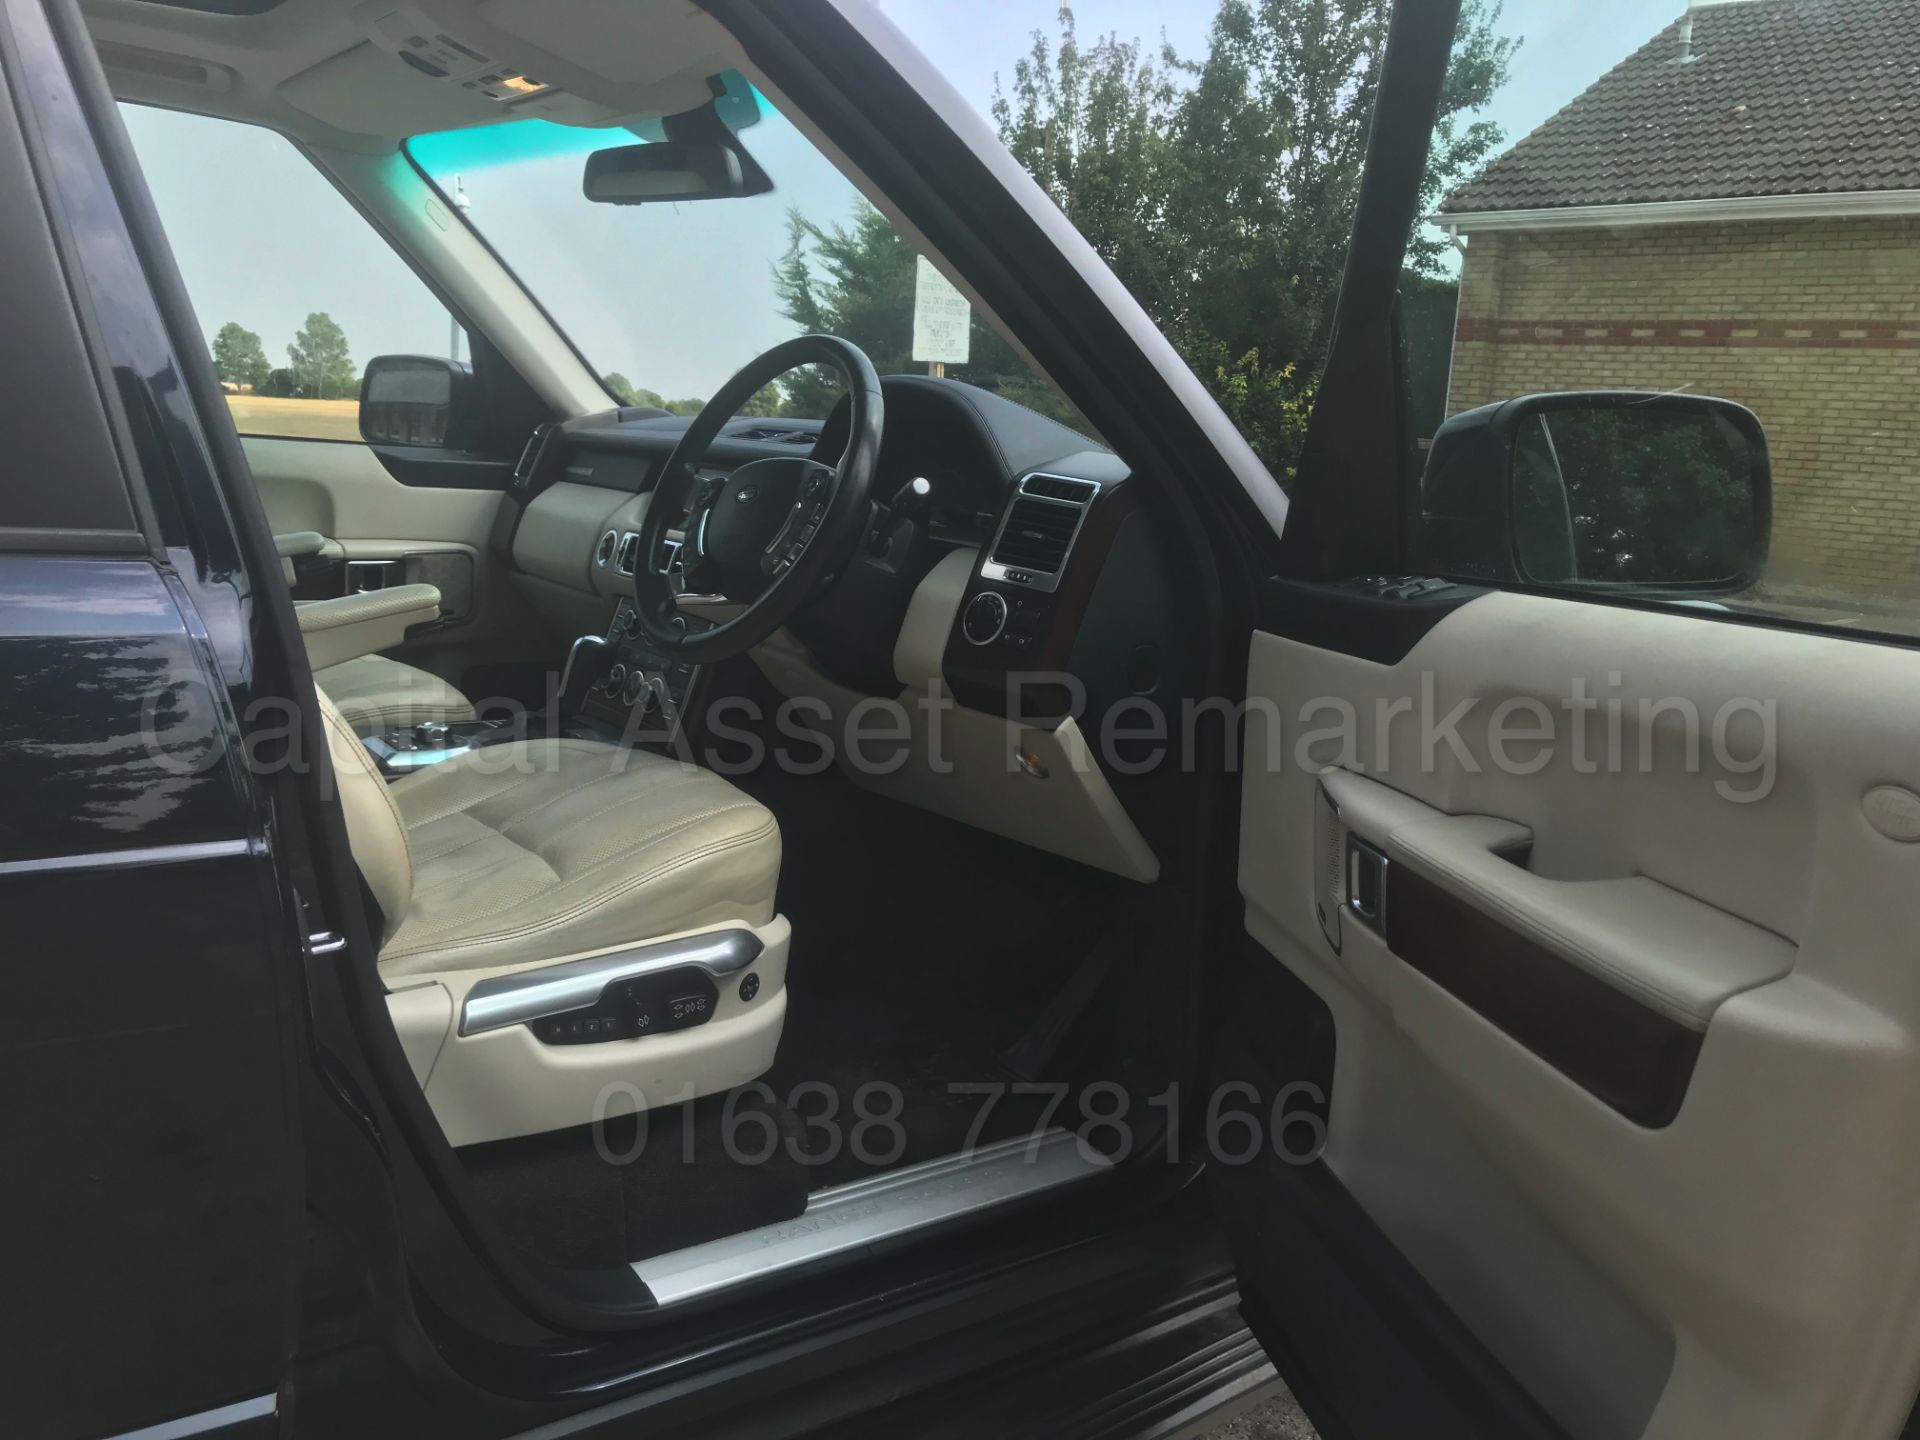 RANGE ROVER VOGUE **SE EDITION** (2010 - FACELIFT EDITION) 'TDV8 - 268 BHP - AUTO' **FULLY LOADED** - Image 41 of 62